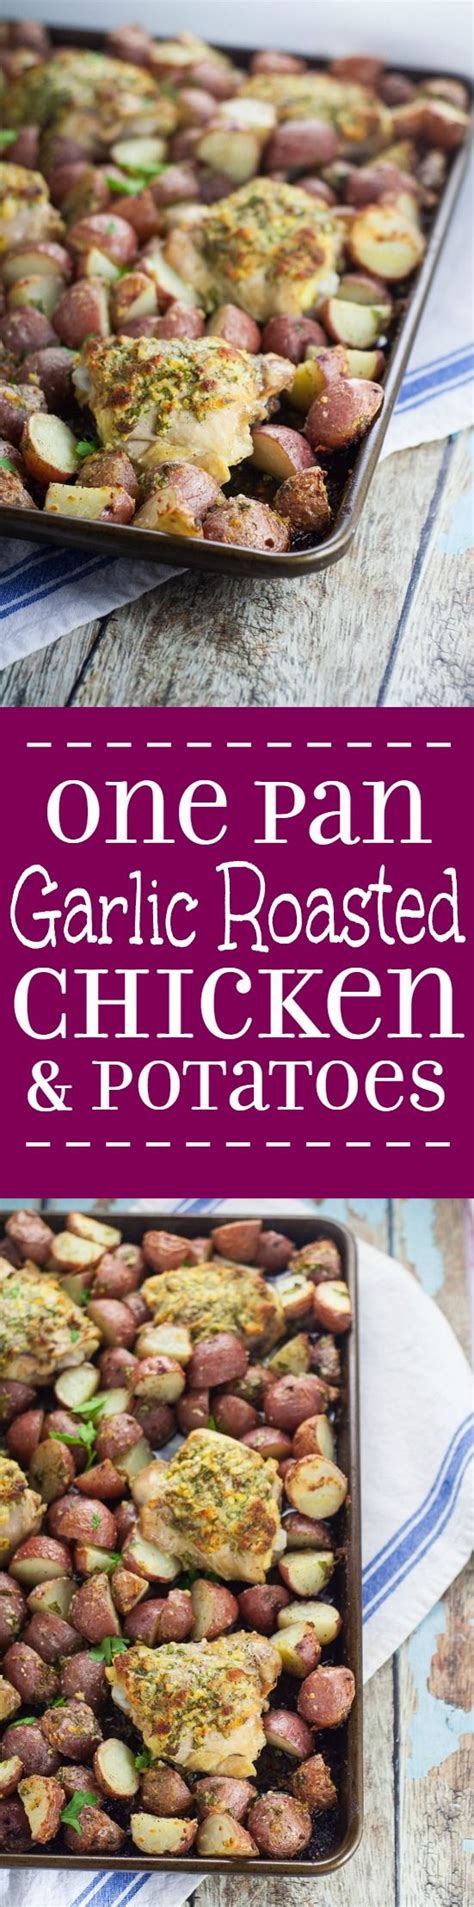 One Pan Garlic Roasted Chicken And Potatoes The Gracious Wife